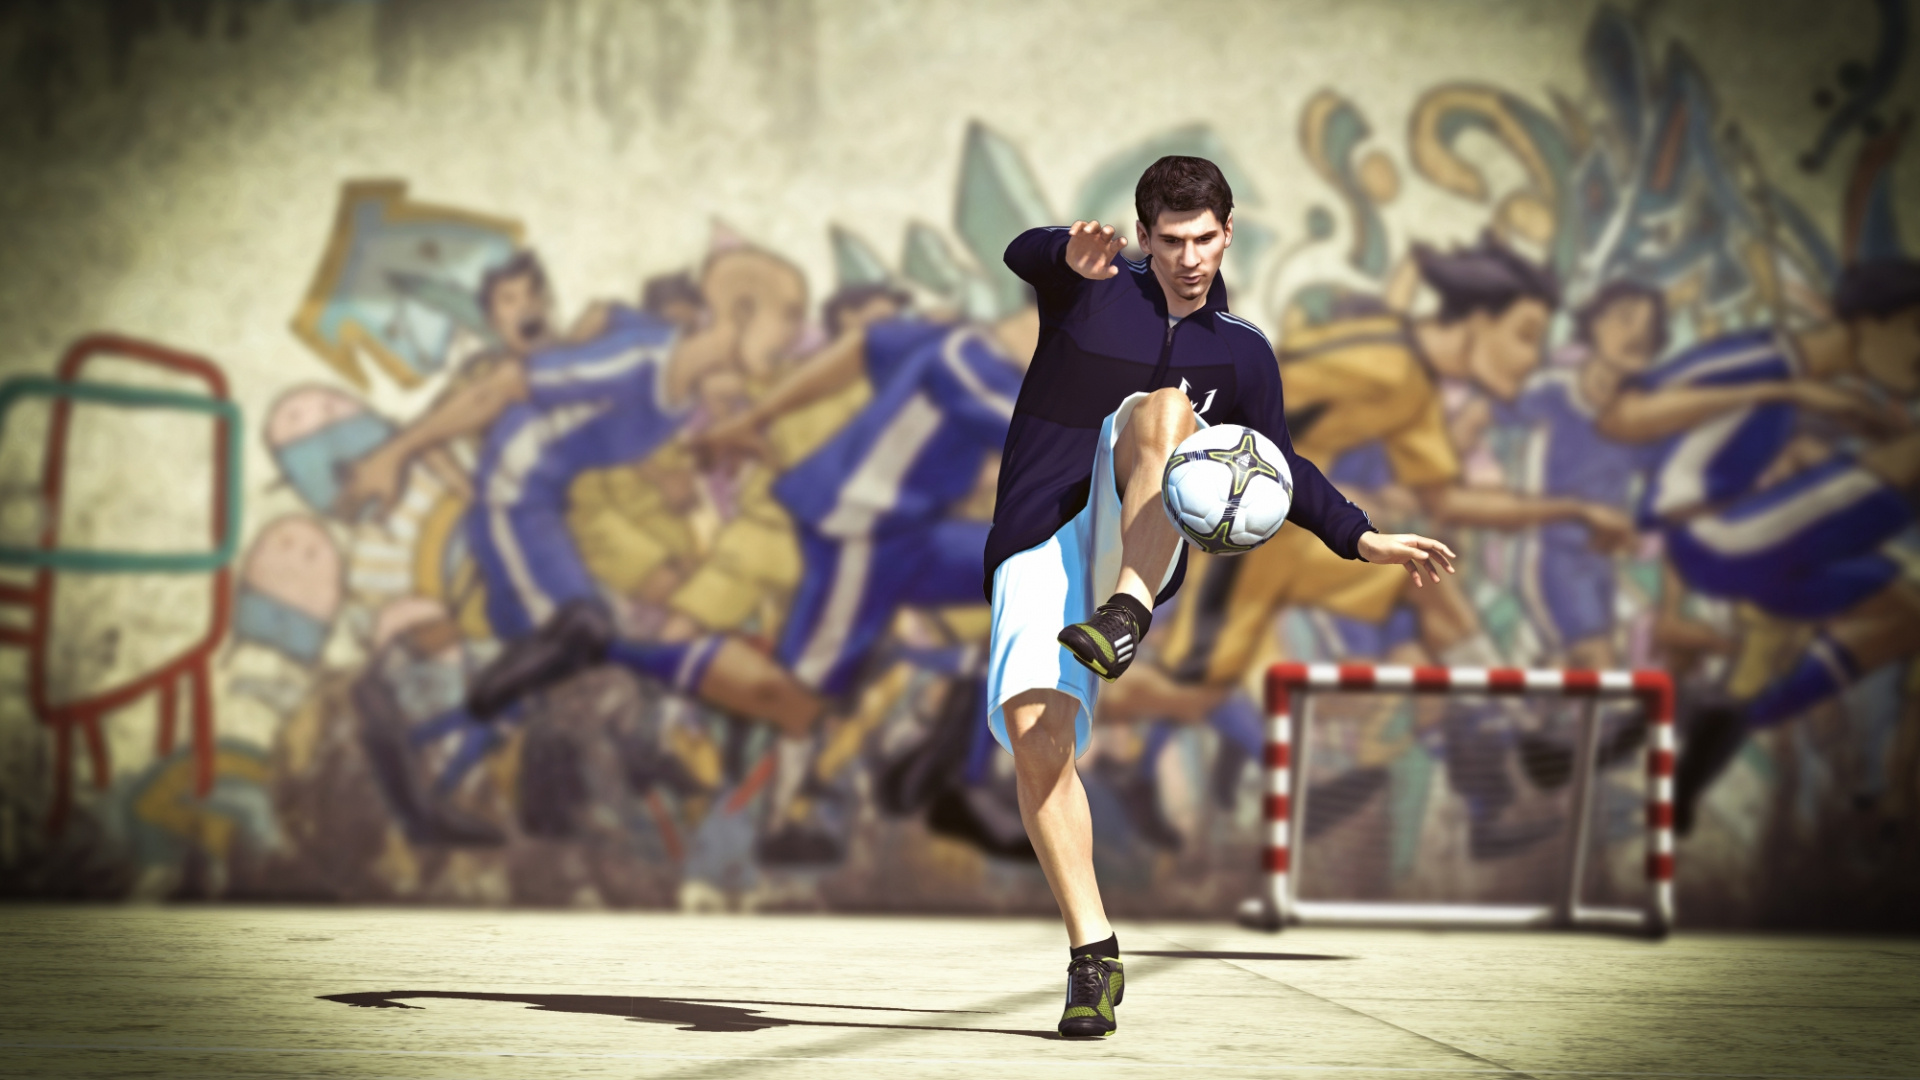 FIFA Soccer (Game): Street 2012, Released in March 2012, PlayStation 3, Xbox 360. 1920x1080 Full HD Background.